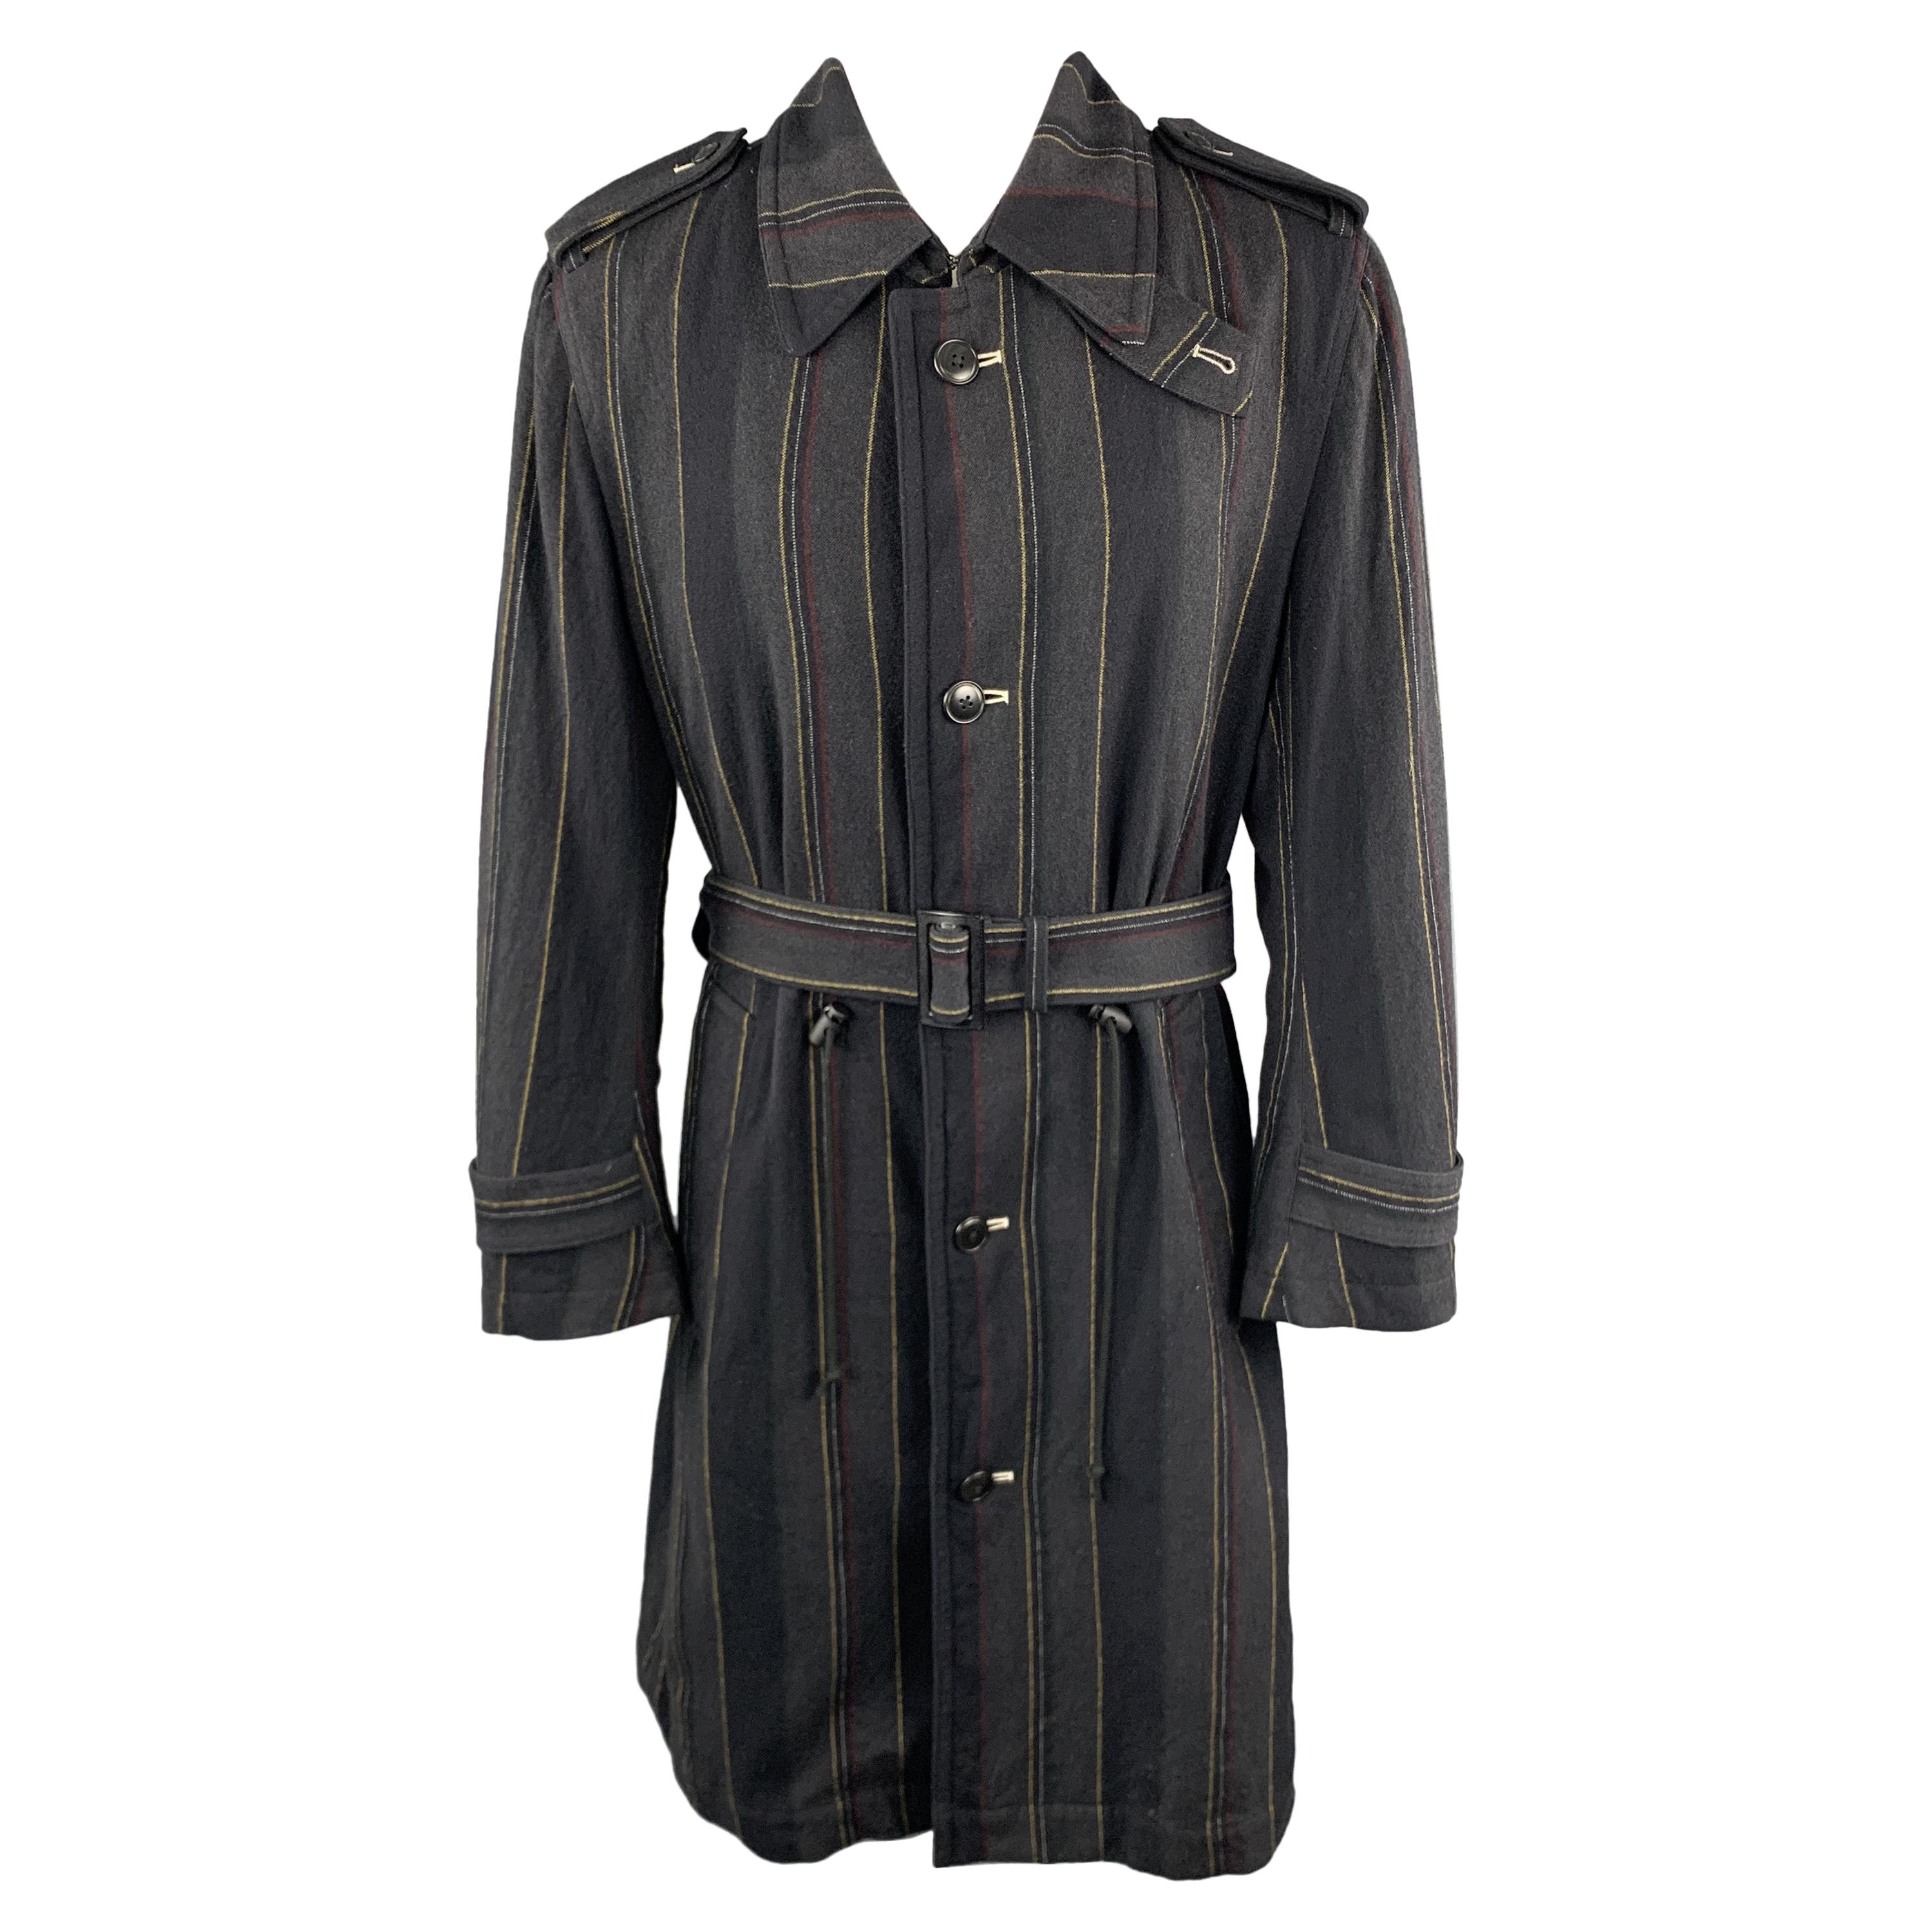 Y's by YOHJI YAMAMOTO Size M Charcoal & Navy Striped Wool Trench Coat